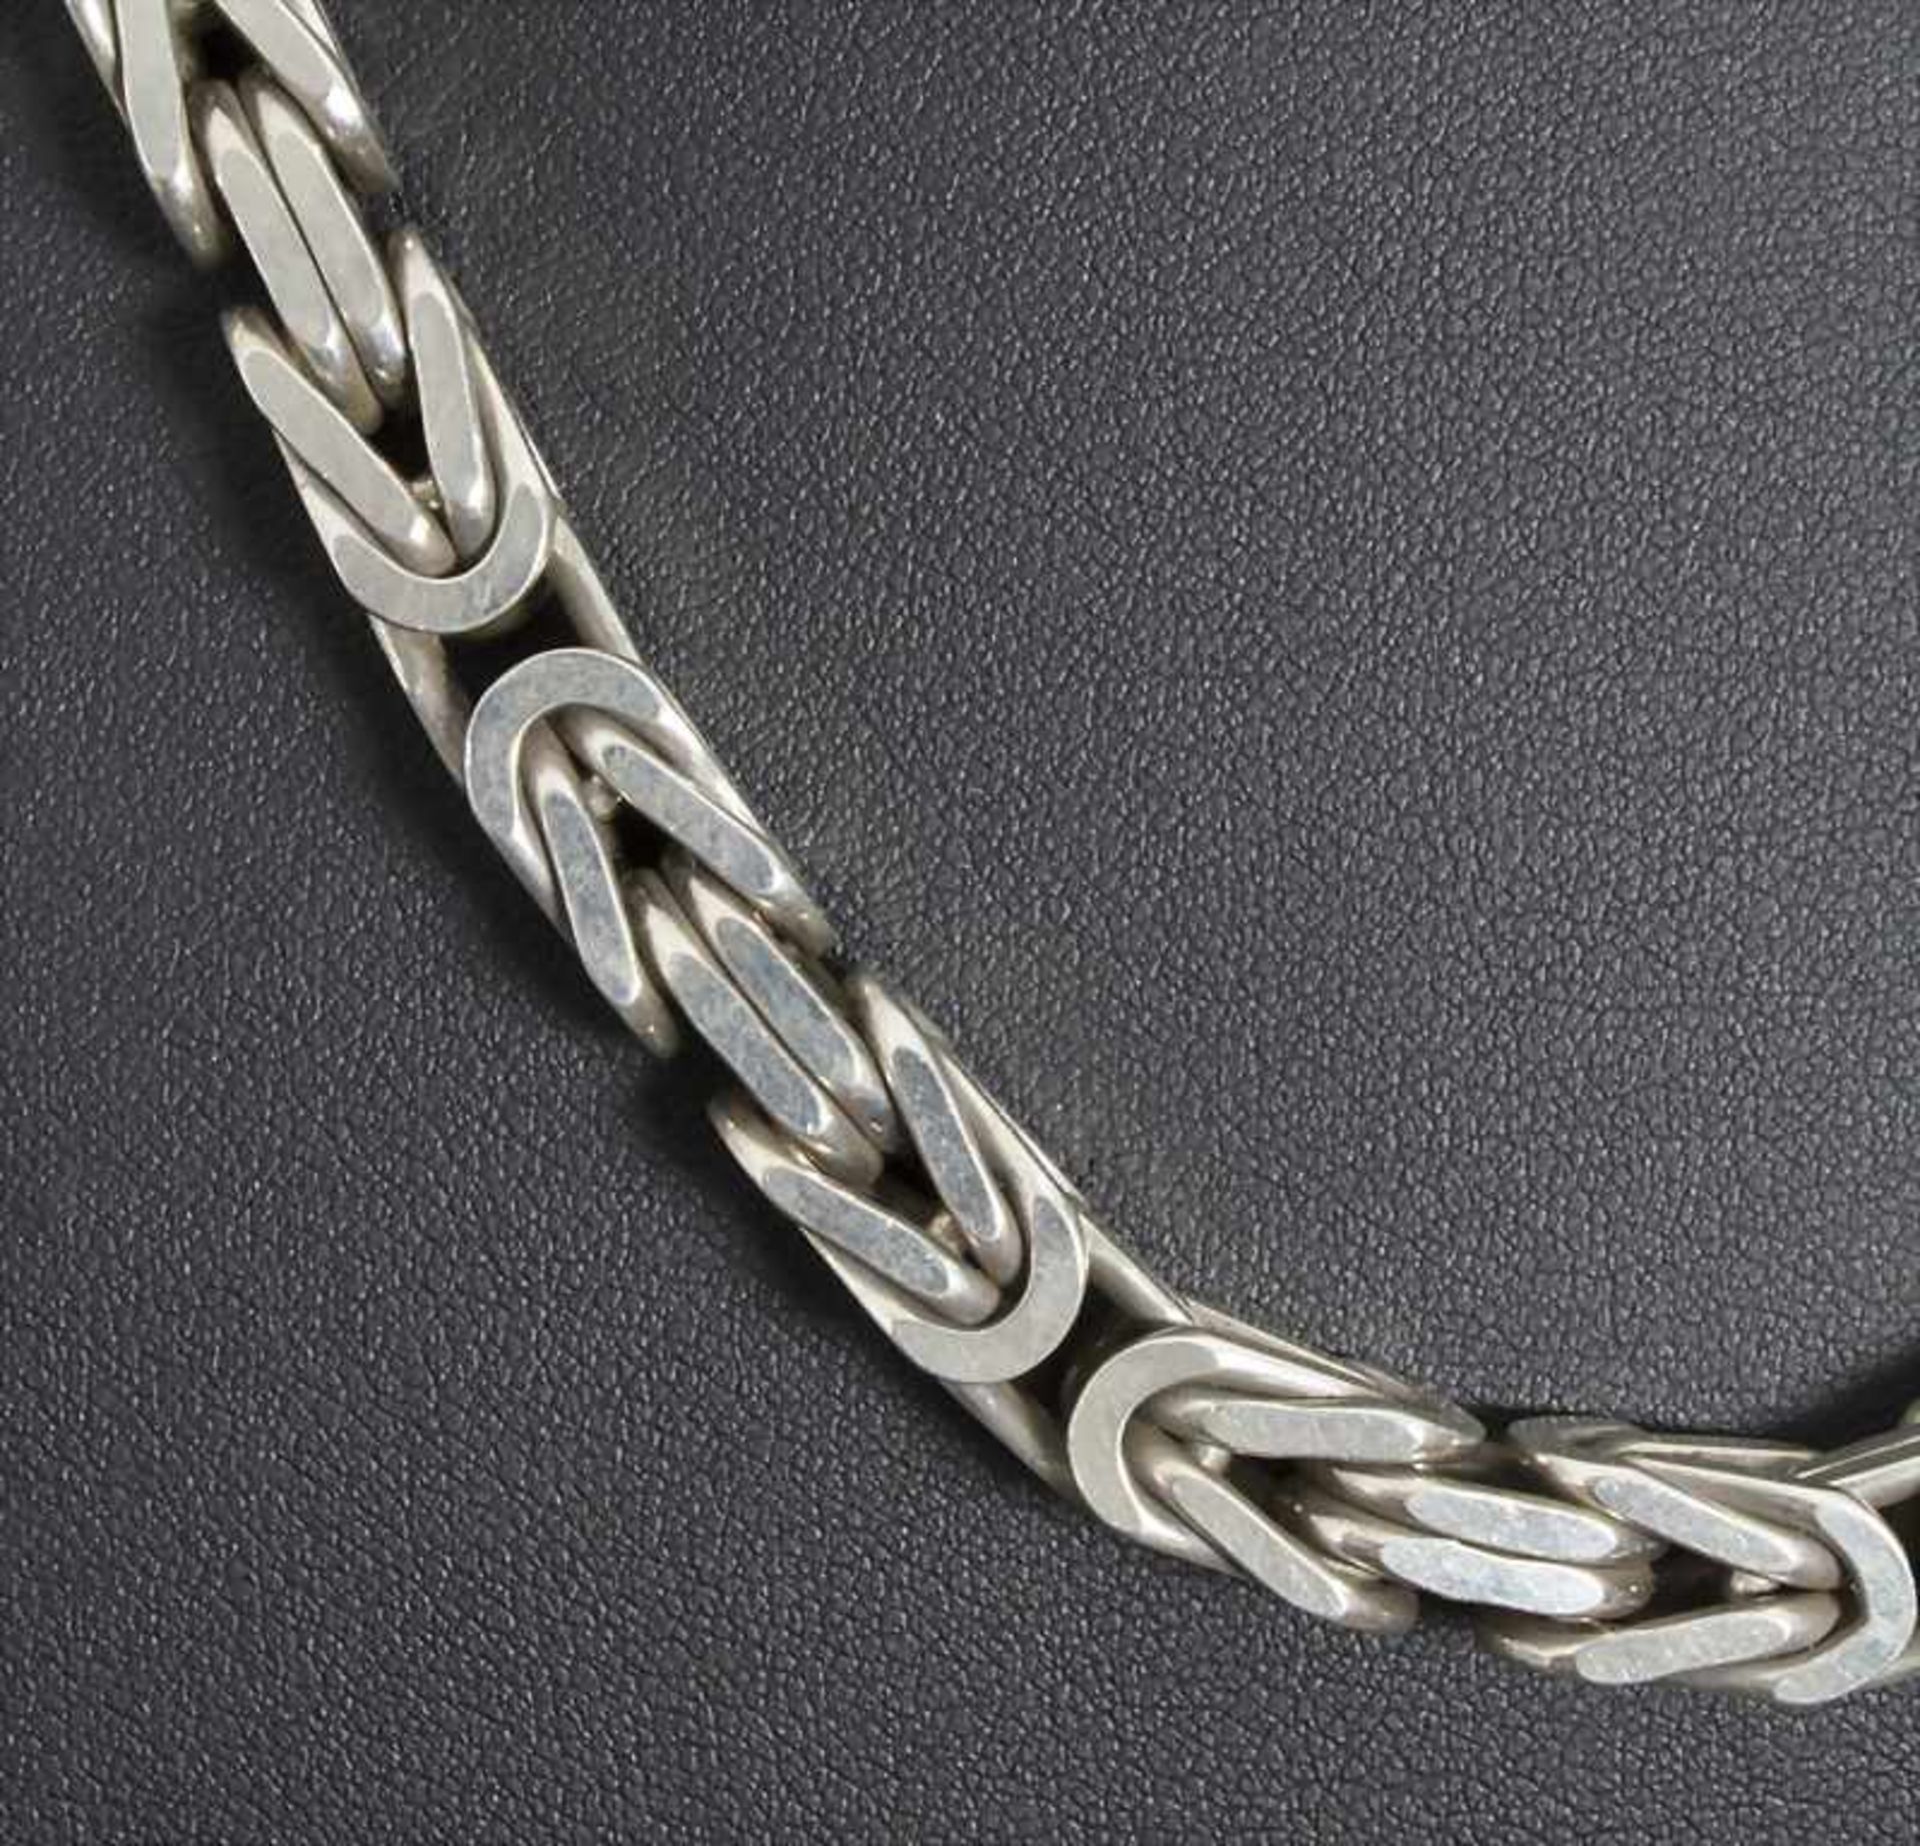 Königskette in Silber / A necklace in sterling - Image 2 of 3